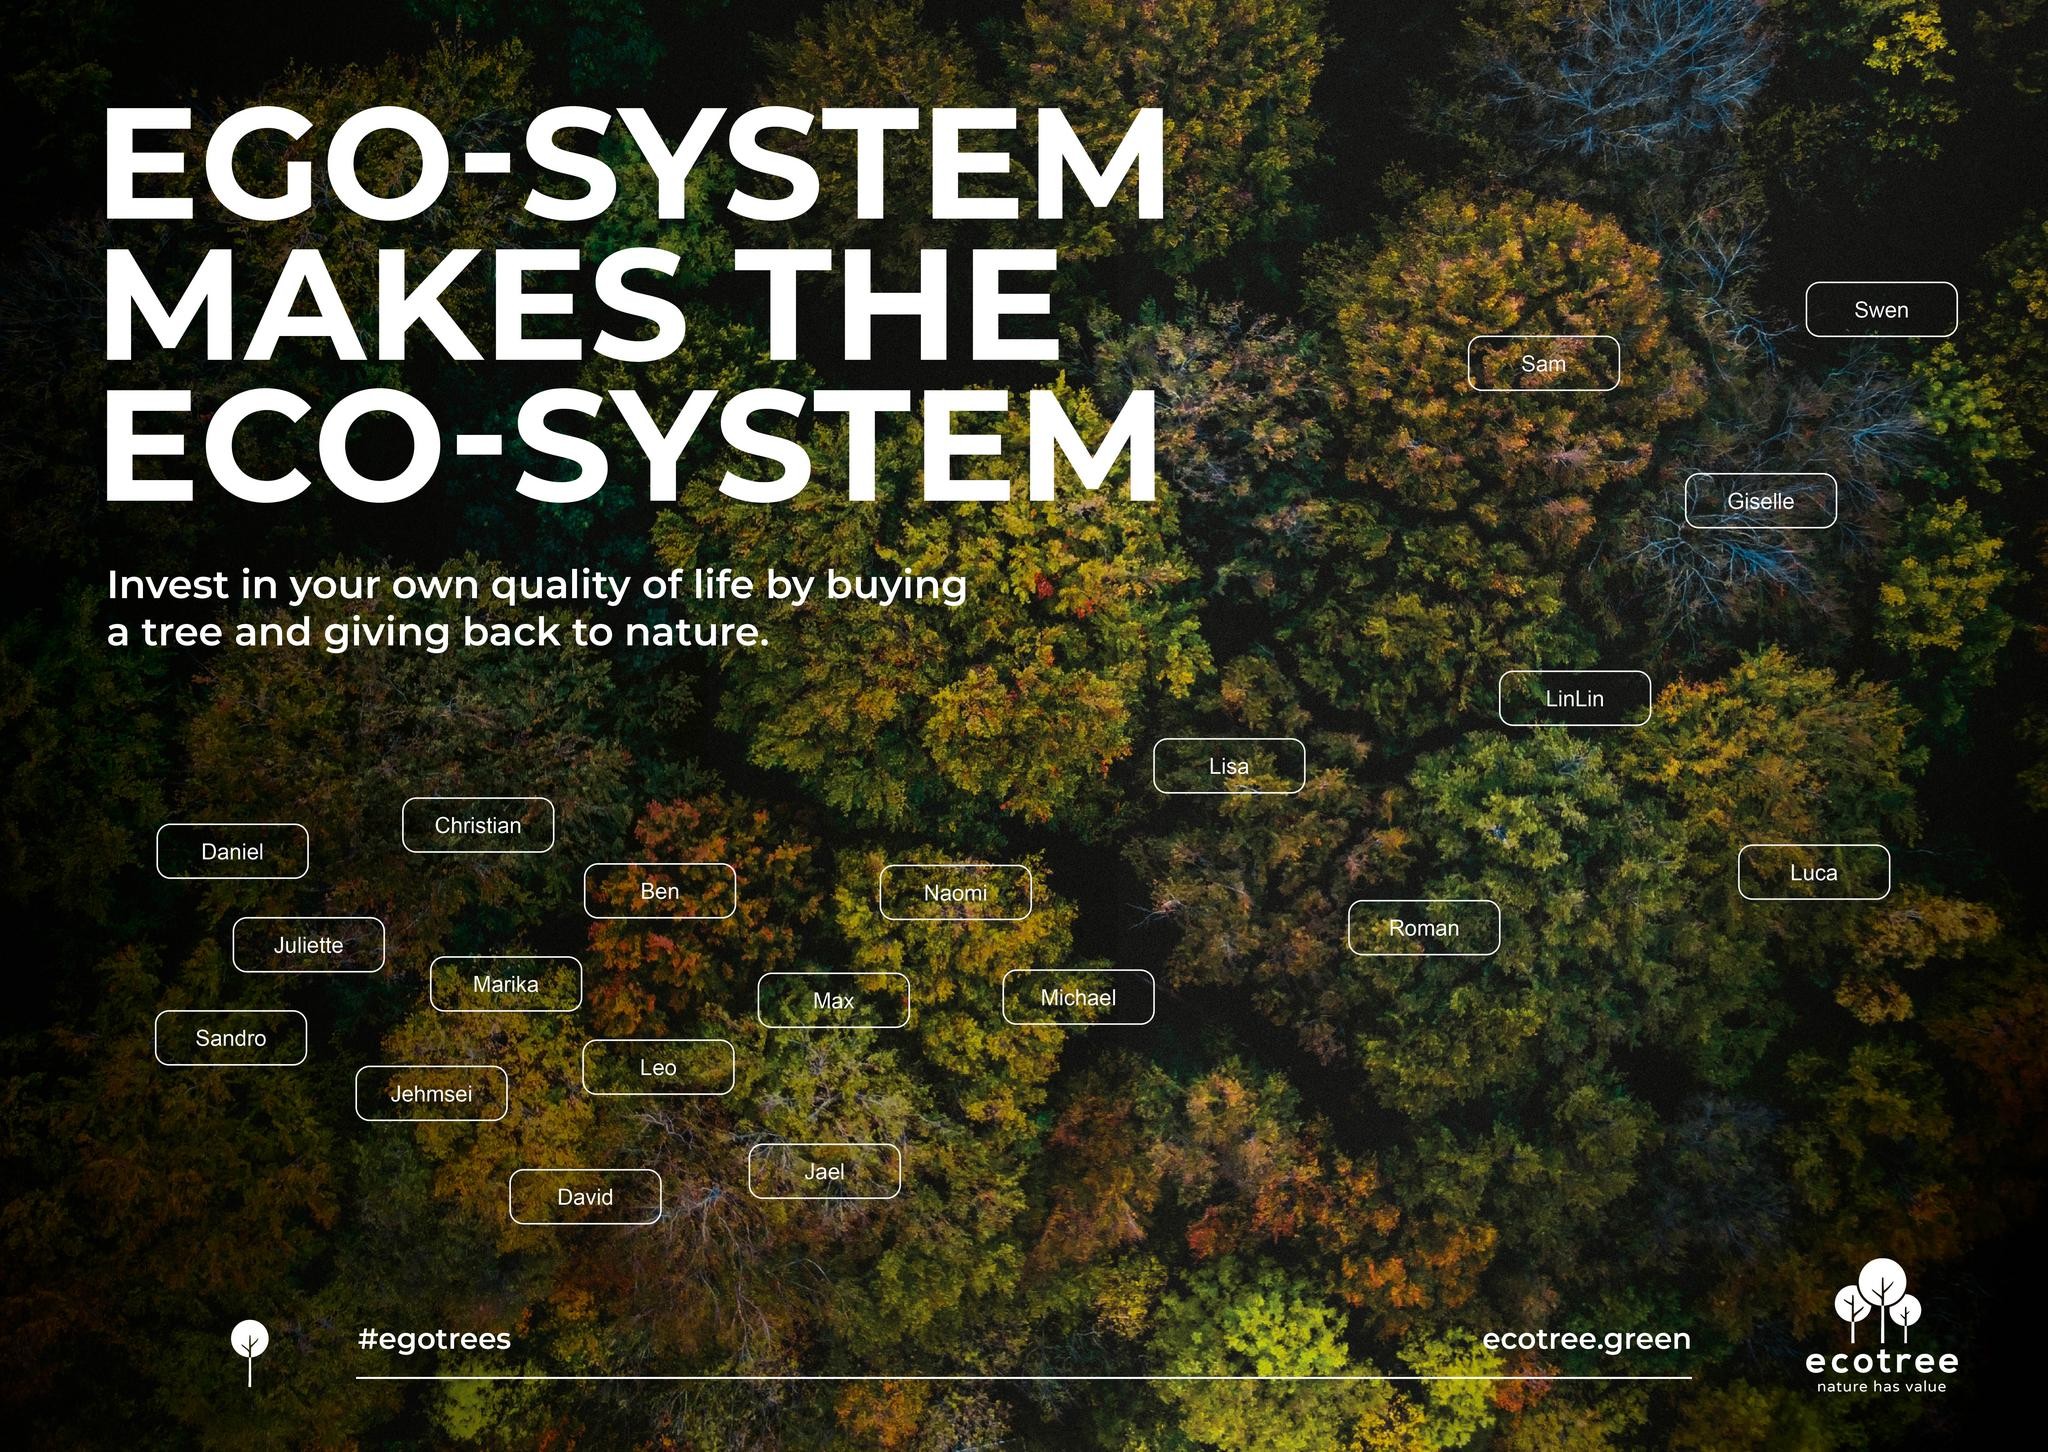 Ego-system makes the eco-system